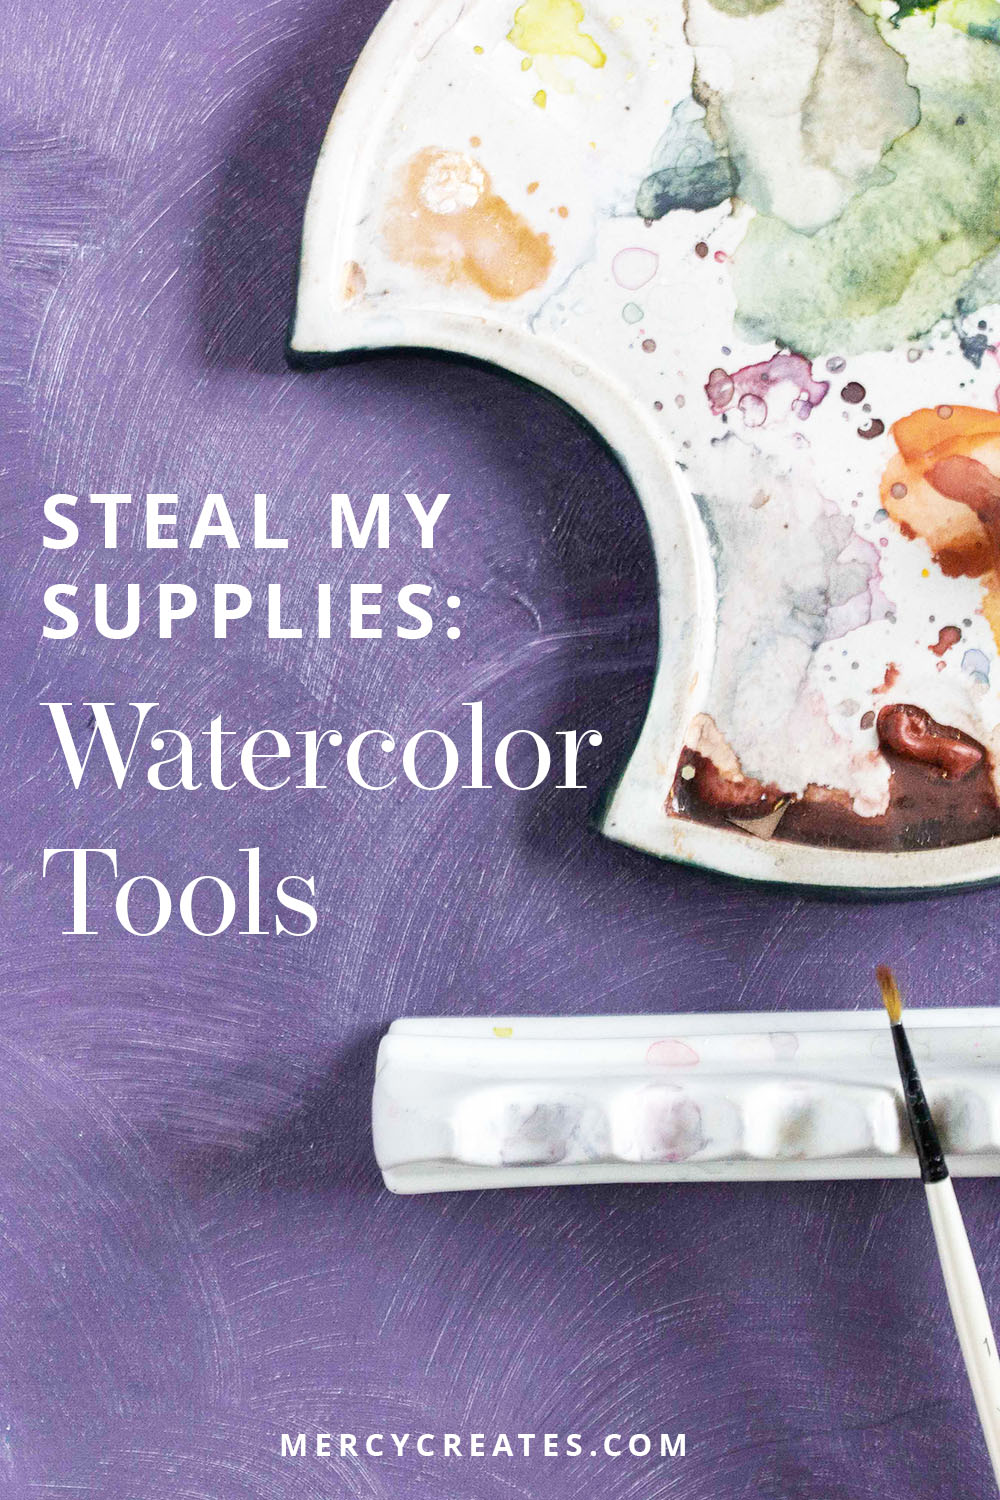 The Mercy Creates recommended list of watercolor tools and supplies—with links to Amazon and Michaels!